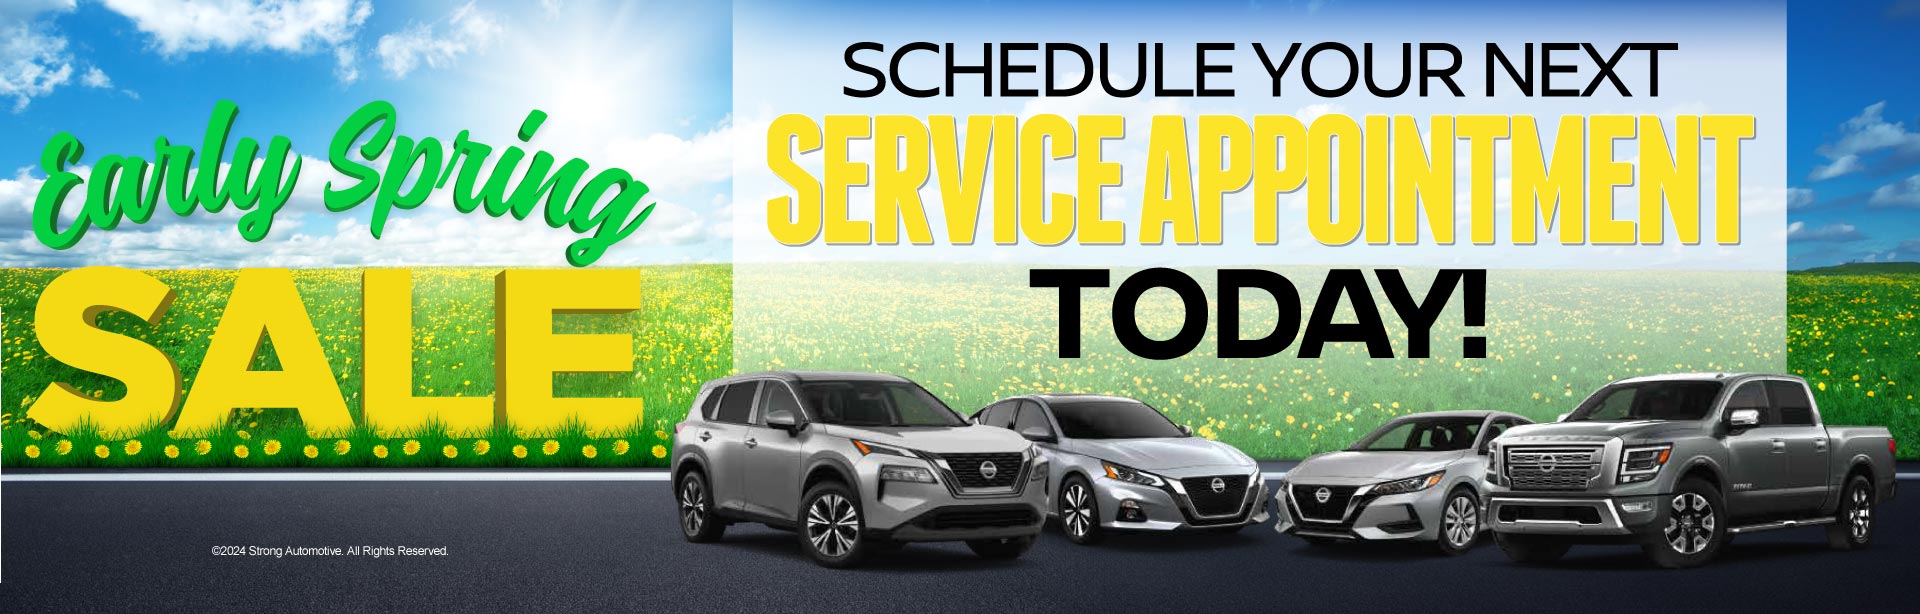 Schedule your next service appointment today!